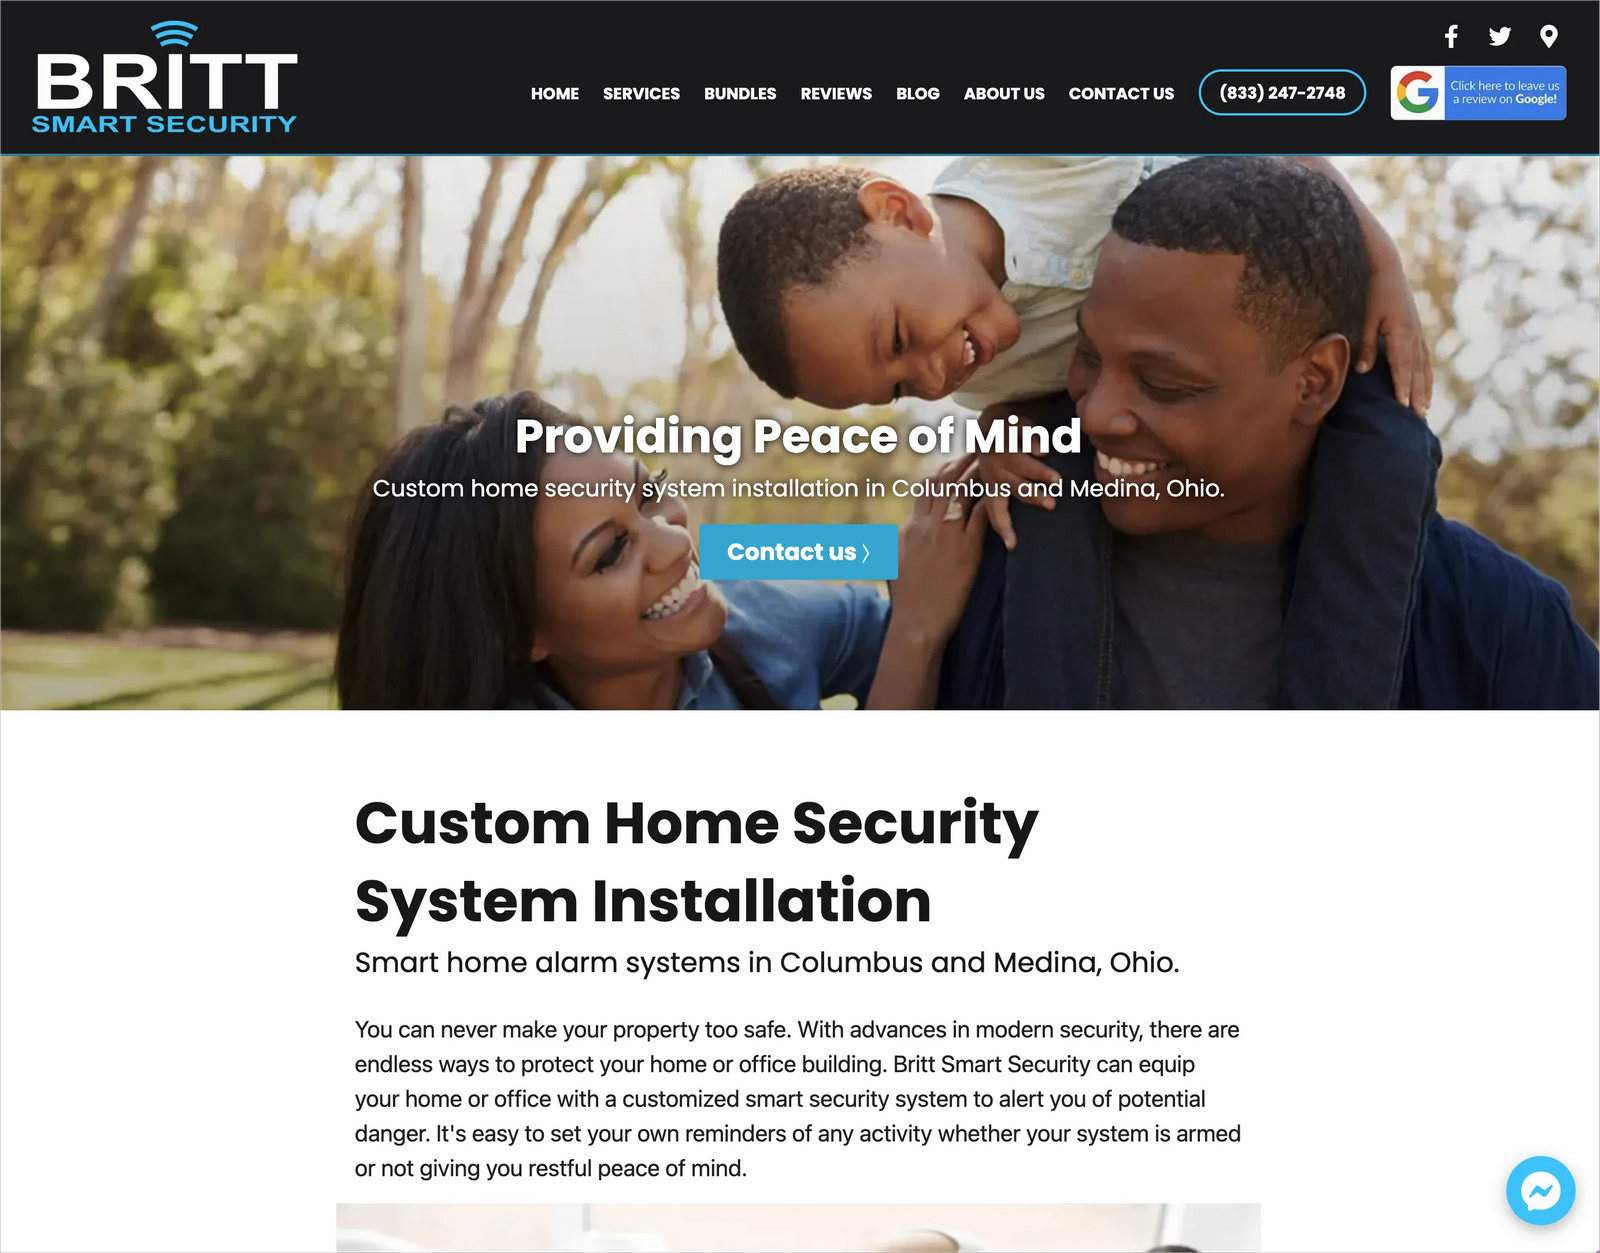 example of effective website services page showcasing a key benefit of "providing peace of mind"